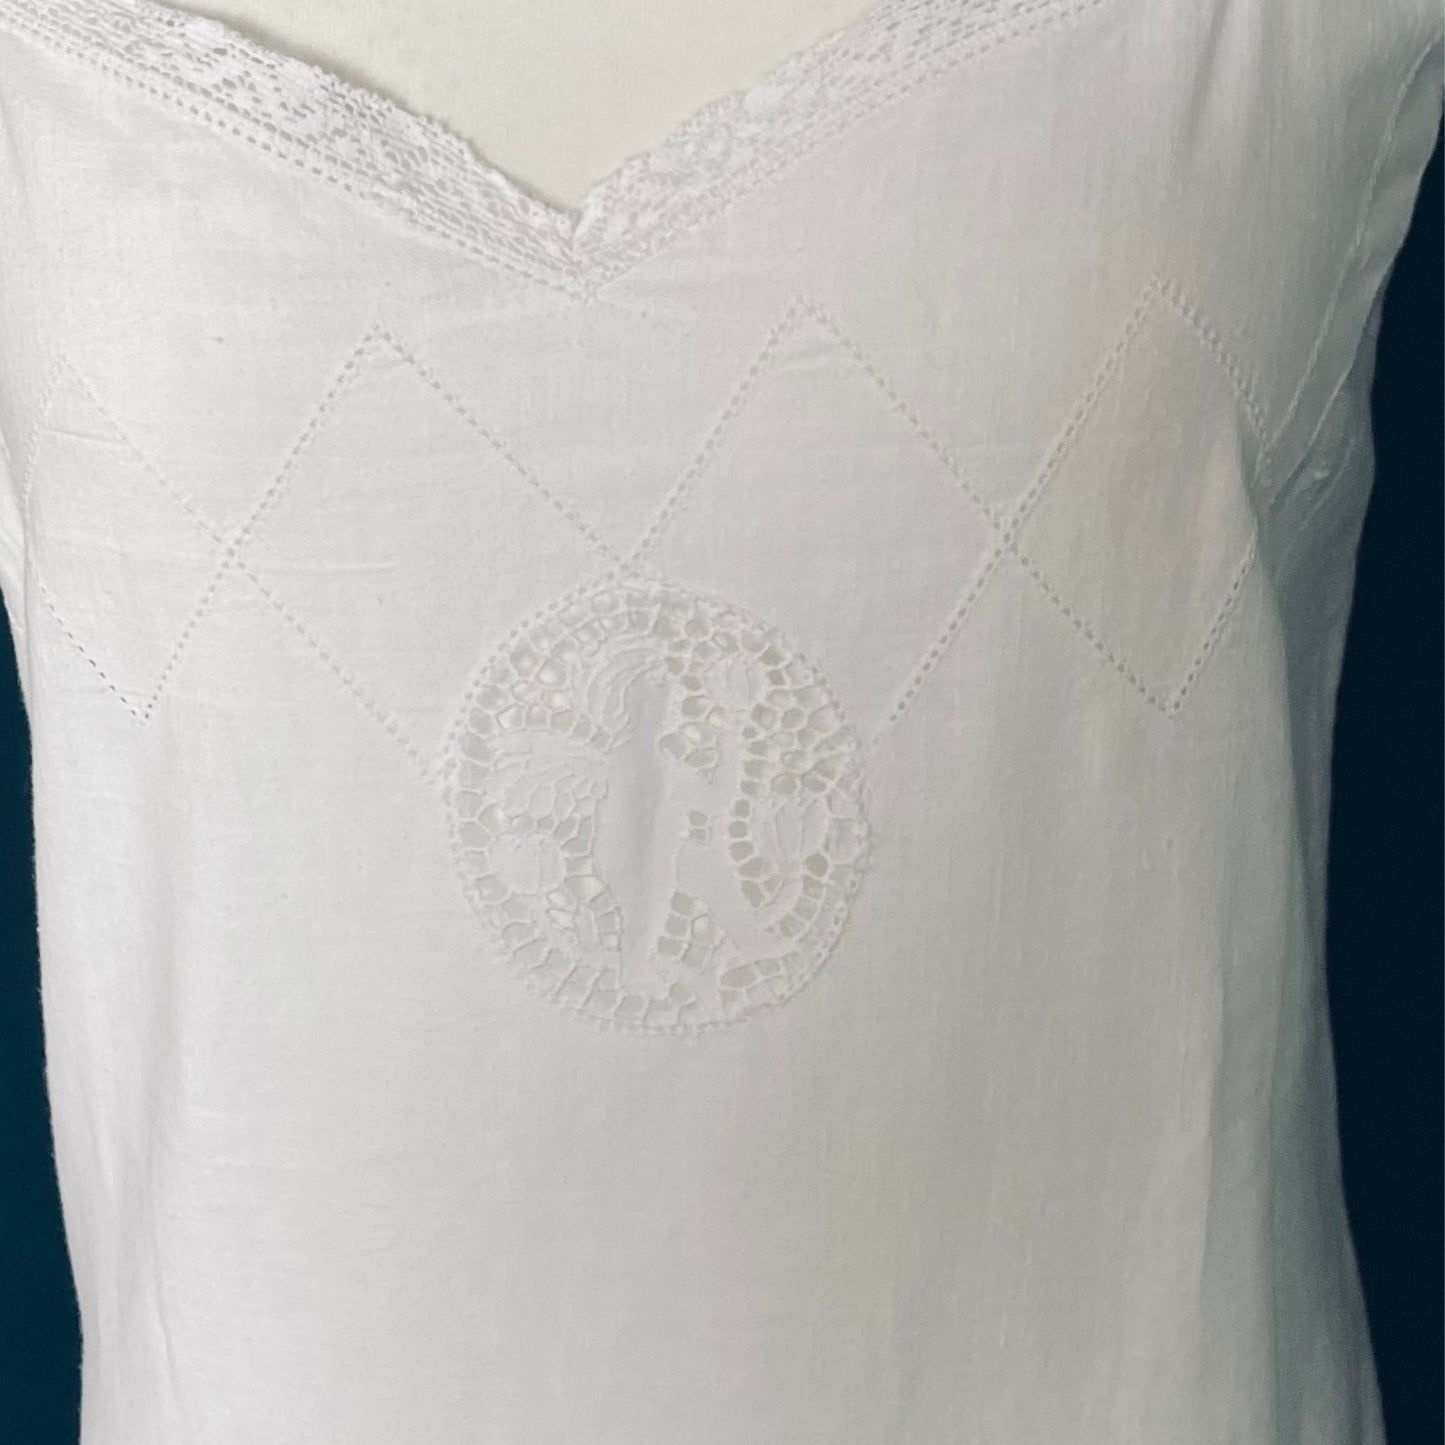 Vintage Edwardian Style White Linen Slip Dress with Lace Detailing. Approx UK size 10 -12